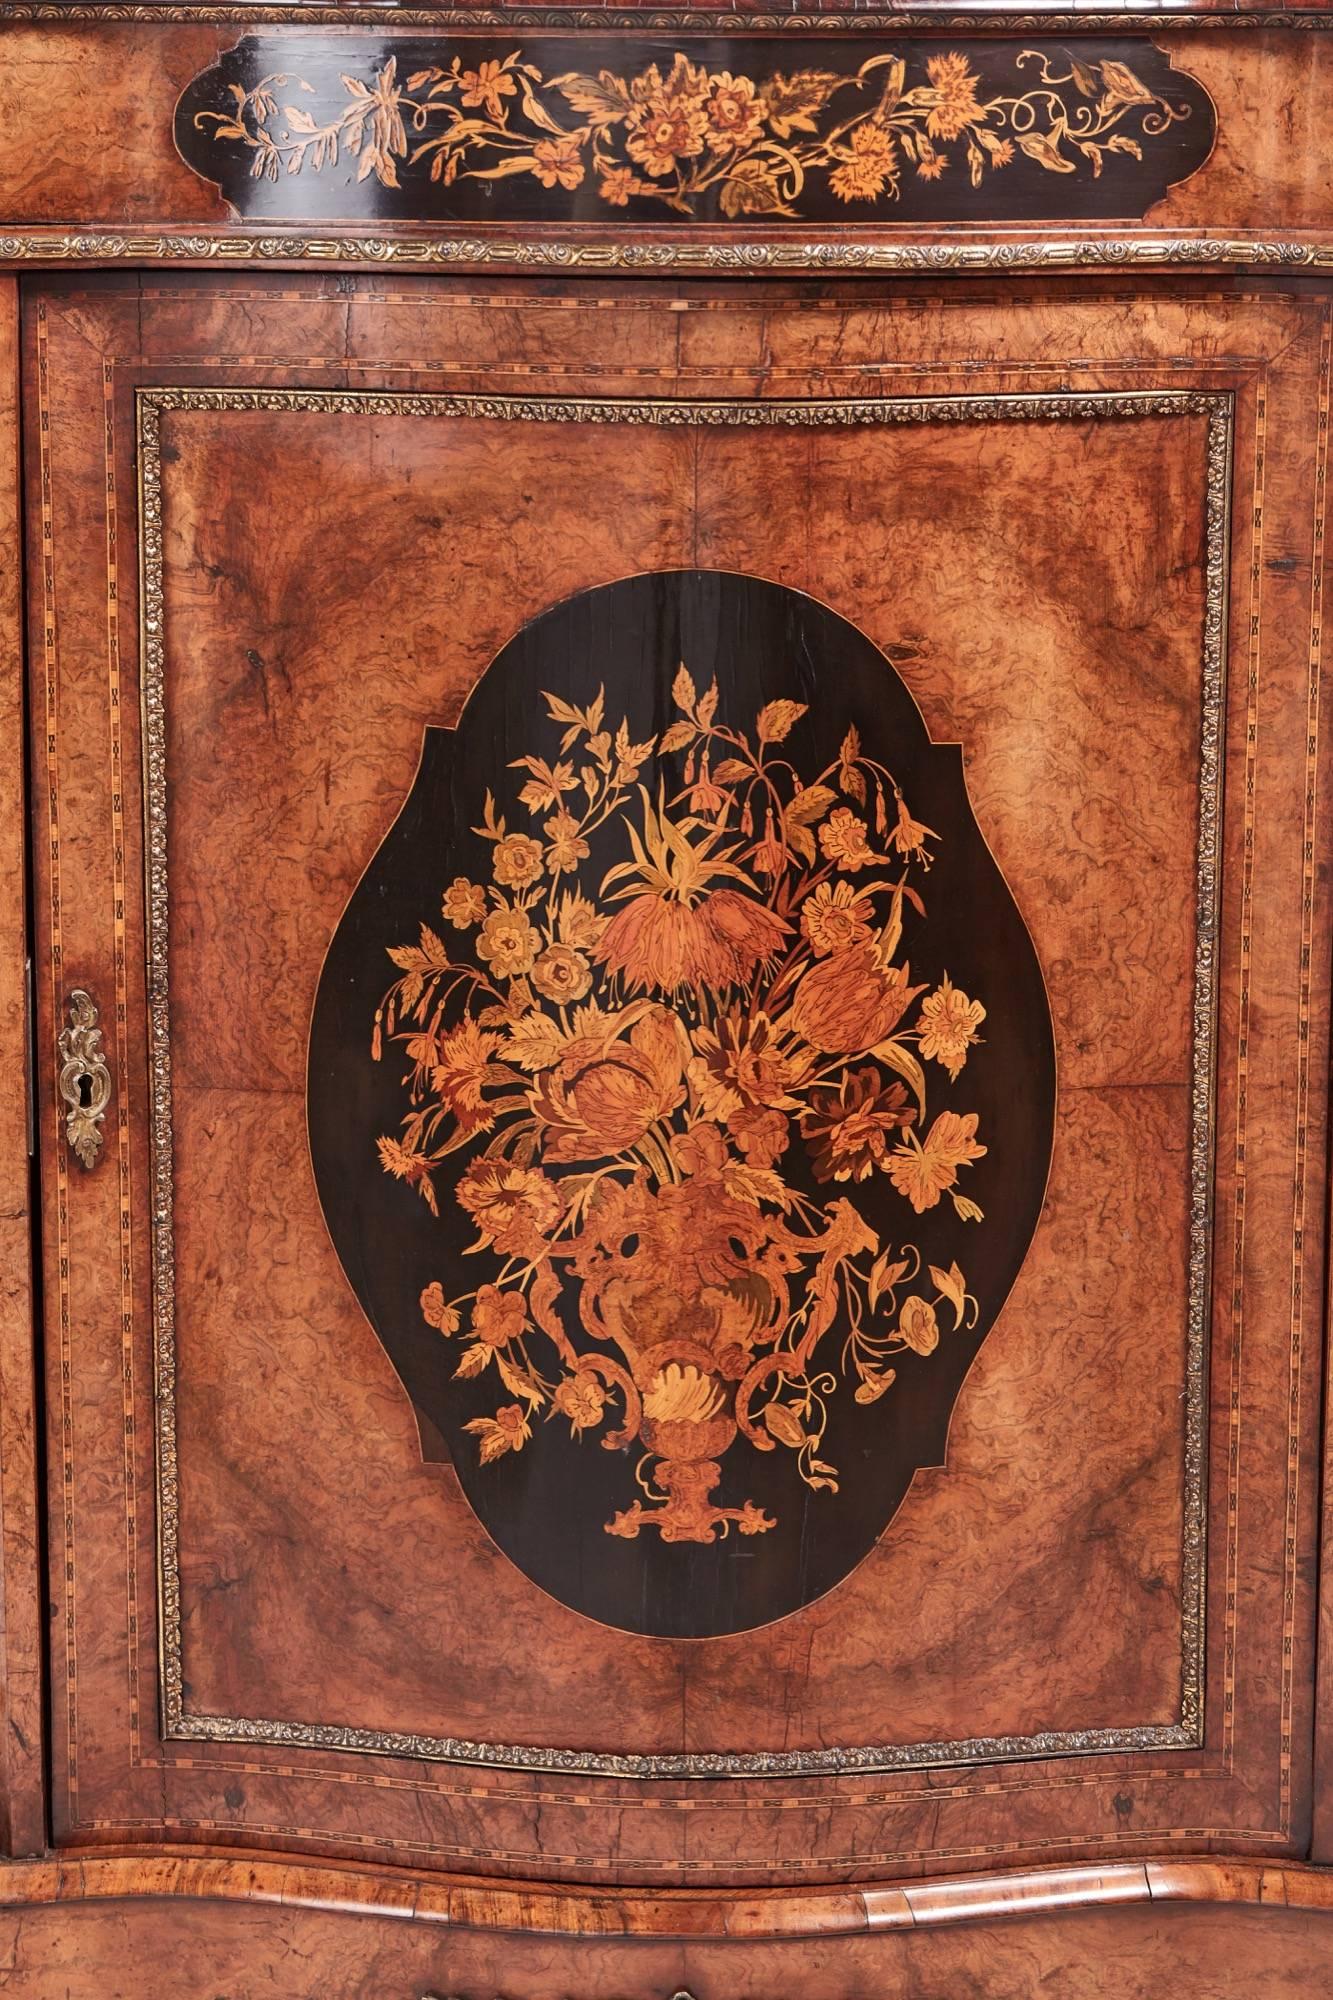 Fantastic quality antique Victorian burr walnut floral marquetry credenza, with a fantastic serpentine shaped burr walnut top, serpentine shaped frieze inlaid with floral marquetry, outstanding ormolu figure heads and mounts, fantastic floral